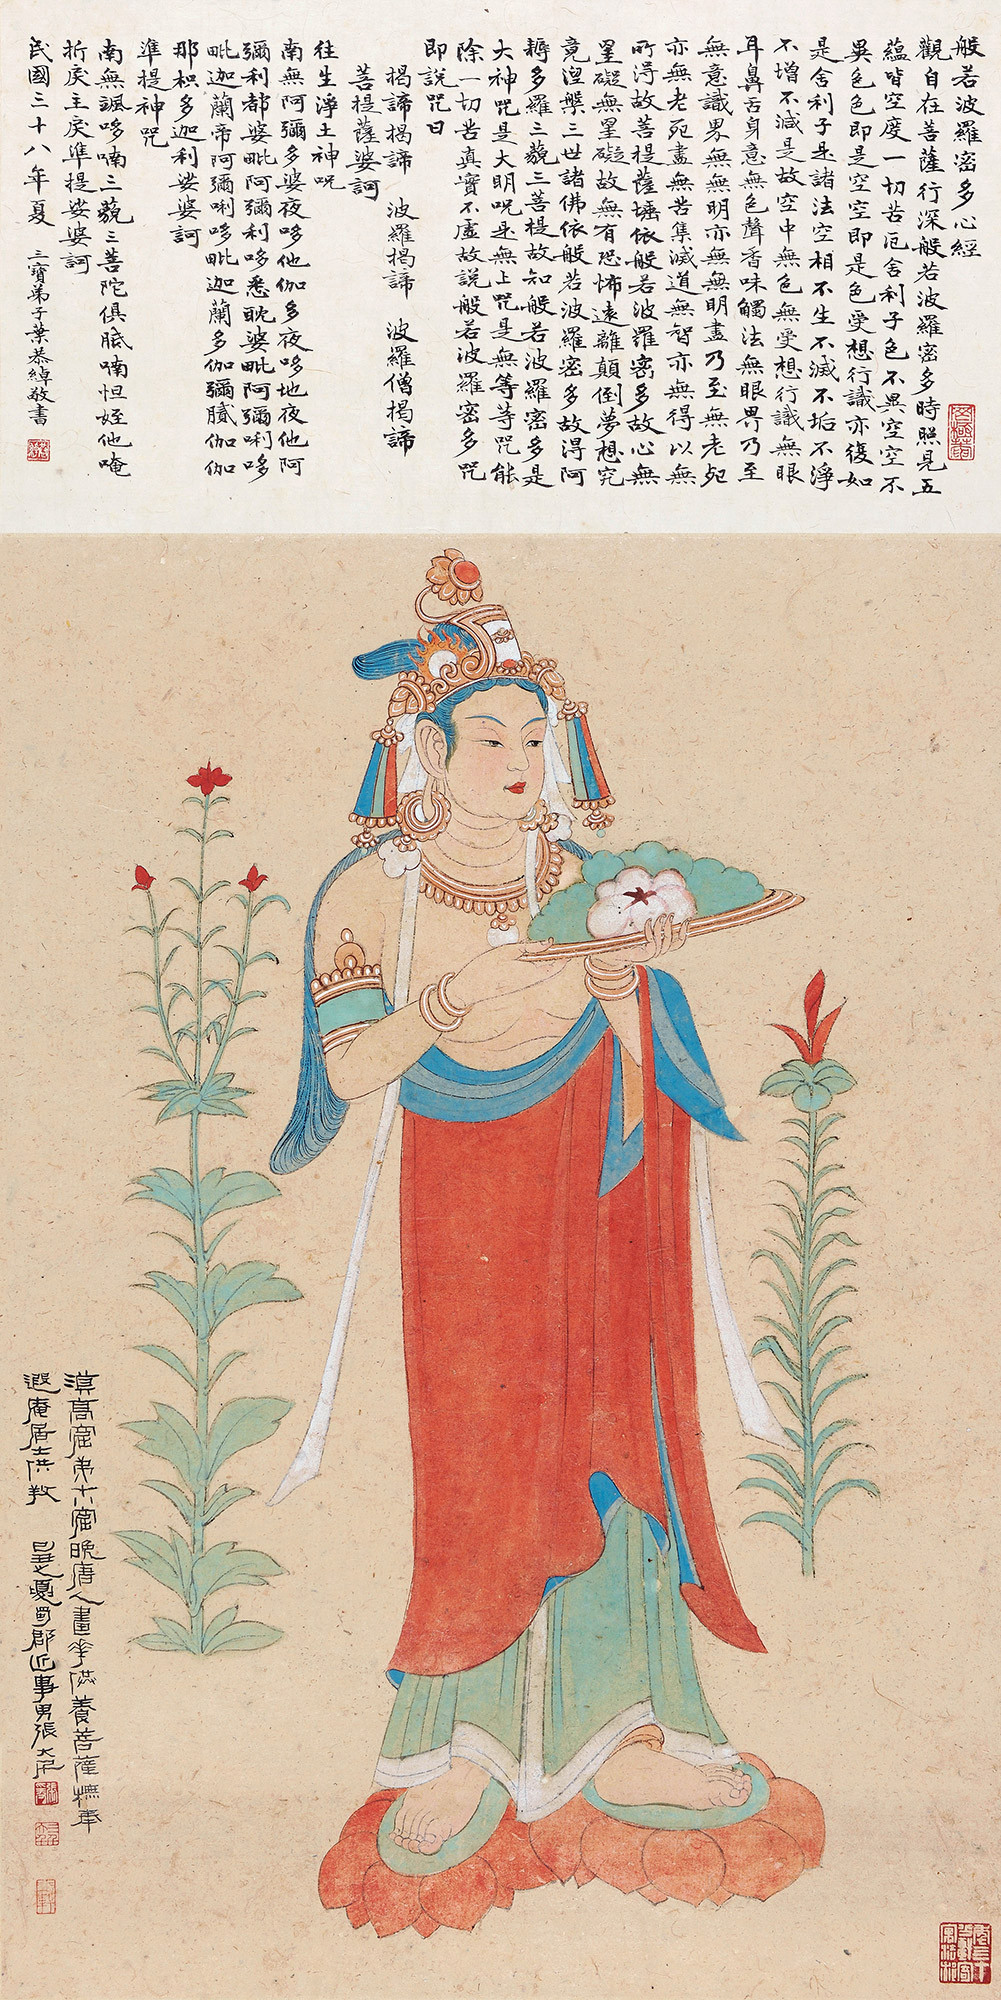 Bodhisattva after Late-Tang Dynasty Mogao Grottoes Style